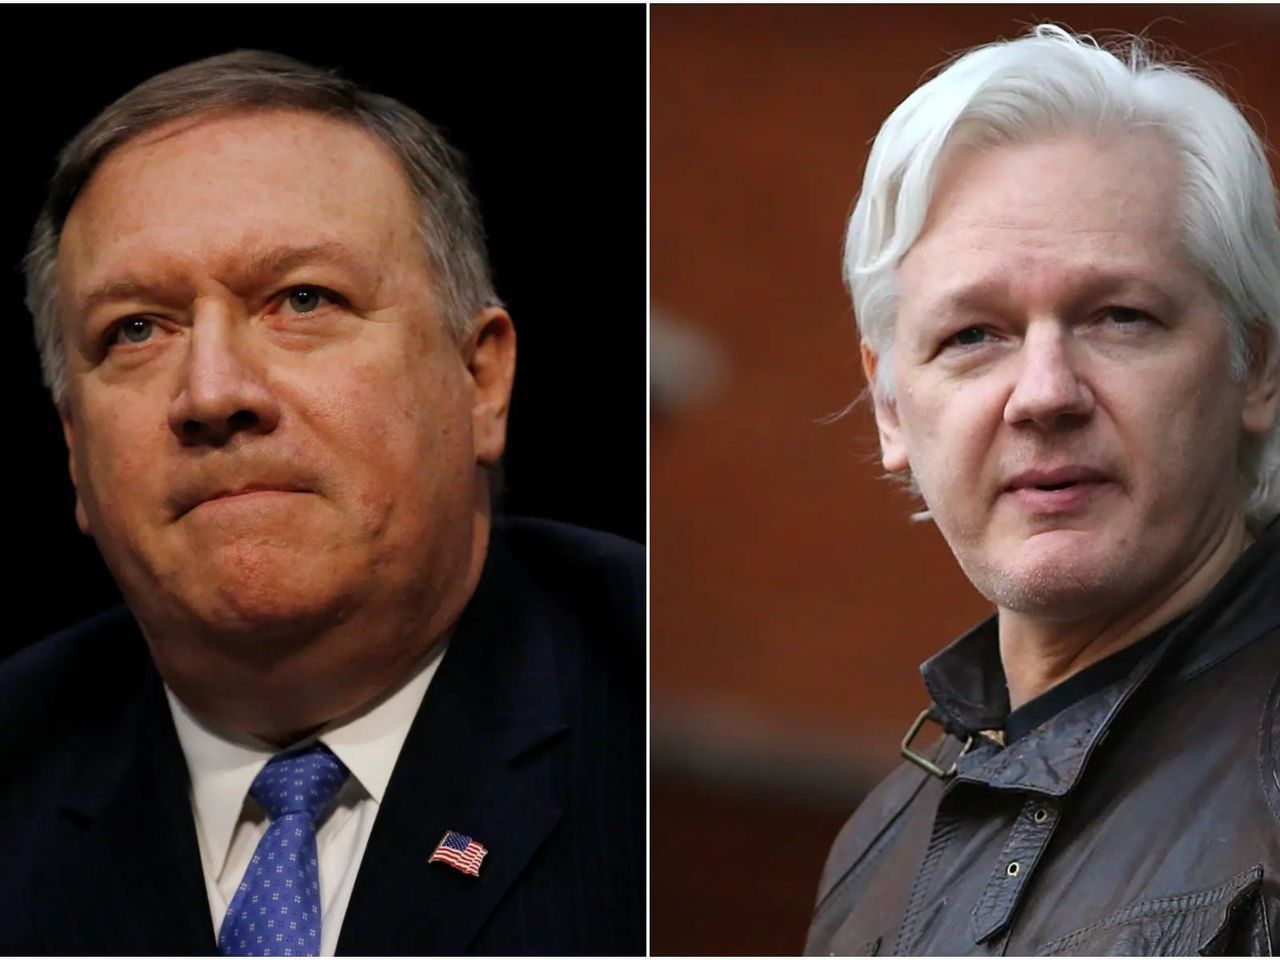 Ex-CIA director called to testify on plot to kill Assange